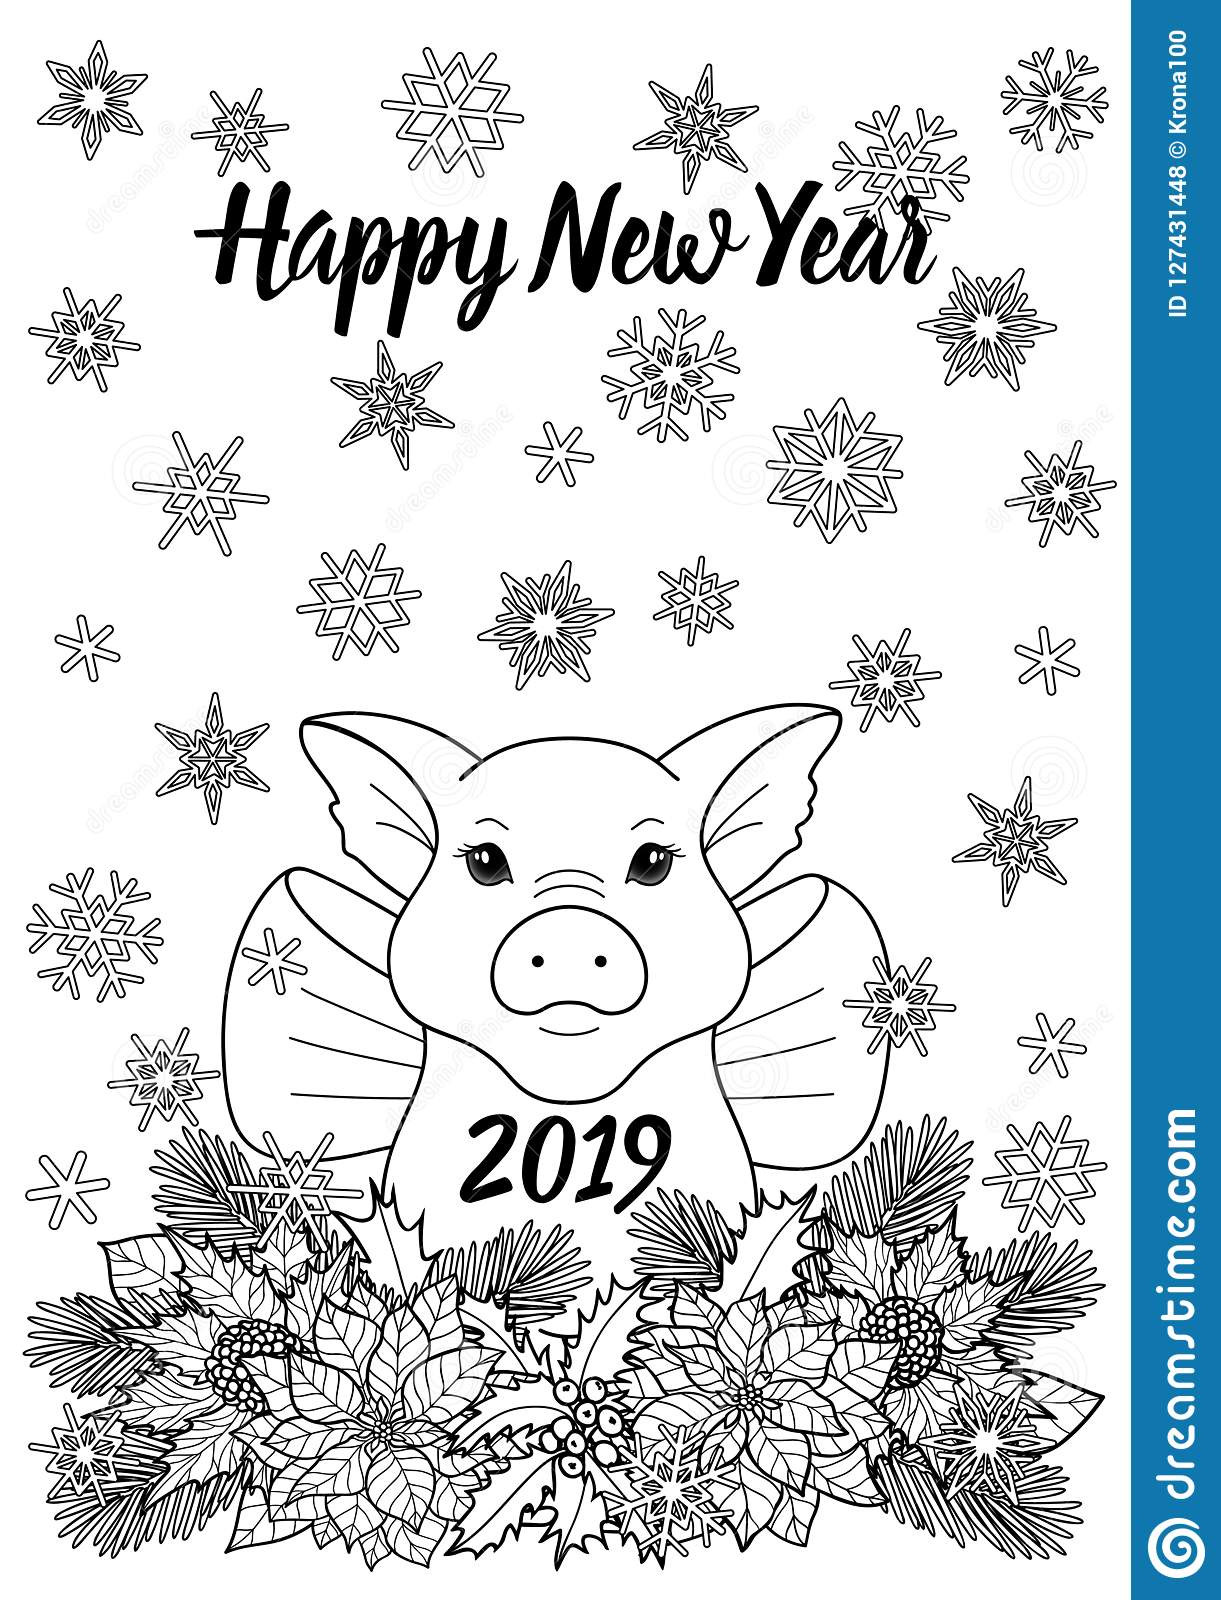 New Years Coloring Pages 2019
 Happy New Year 2019 Greeting Card With Pig Stock Vector